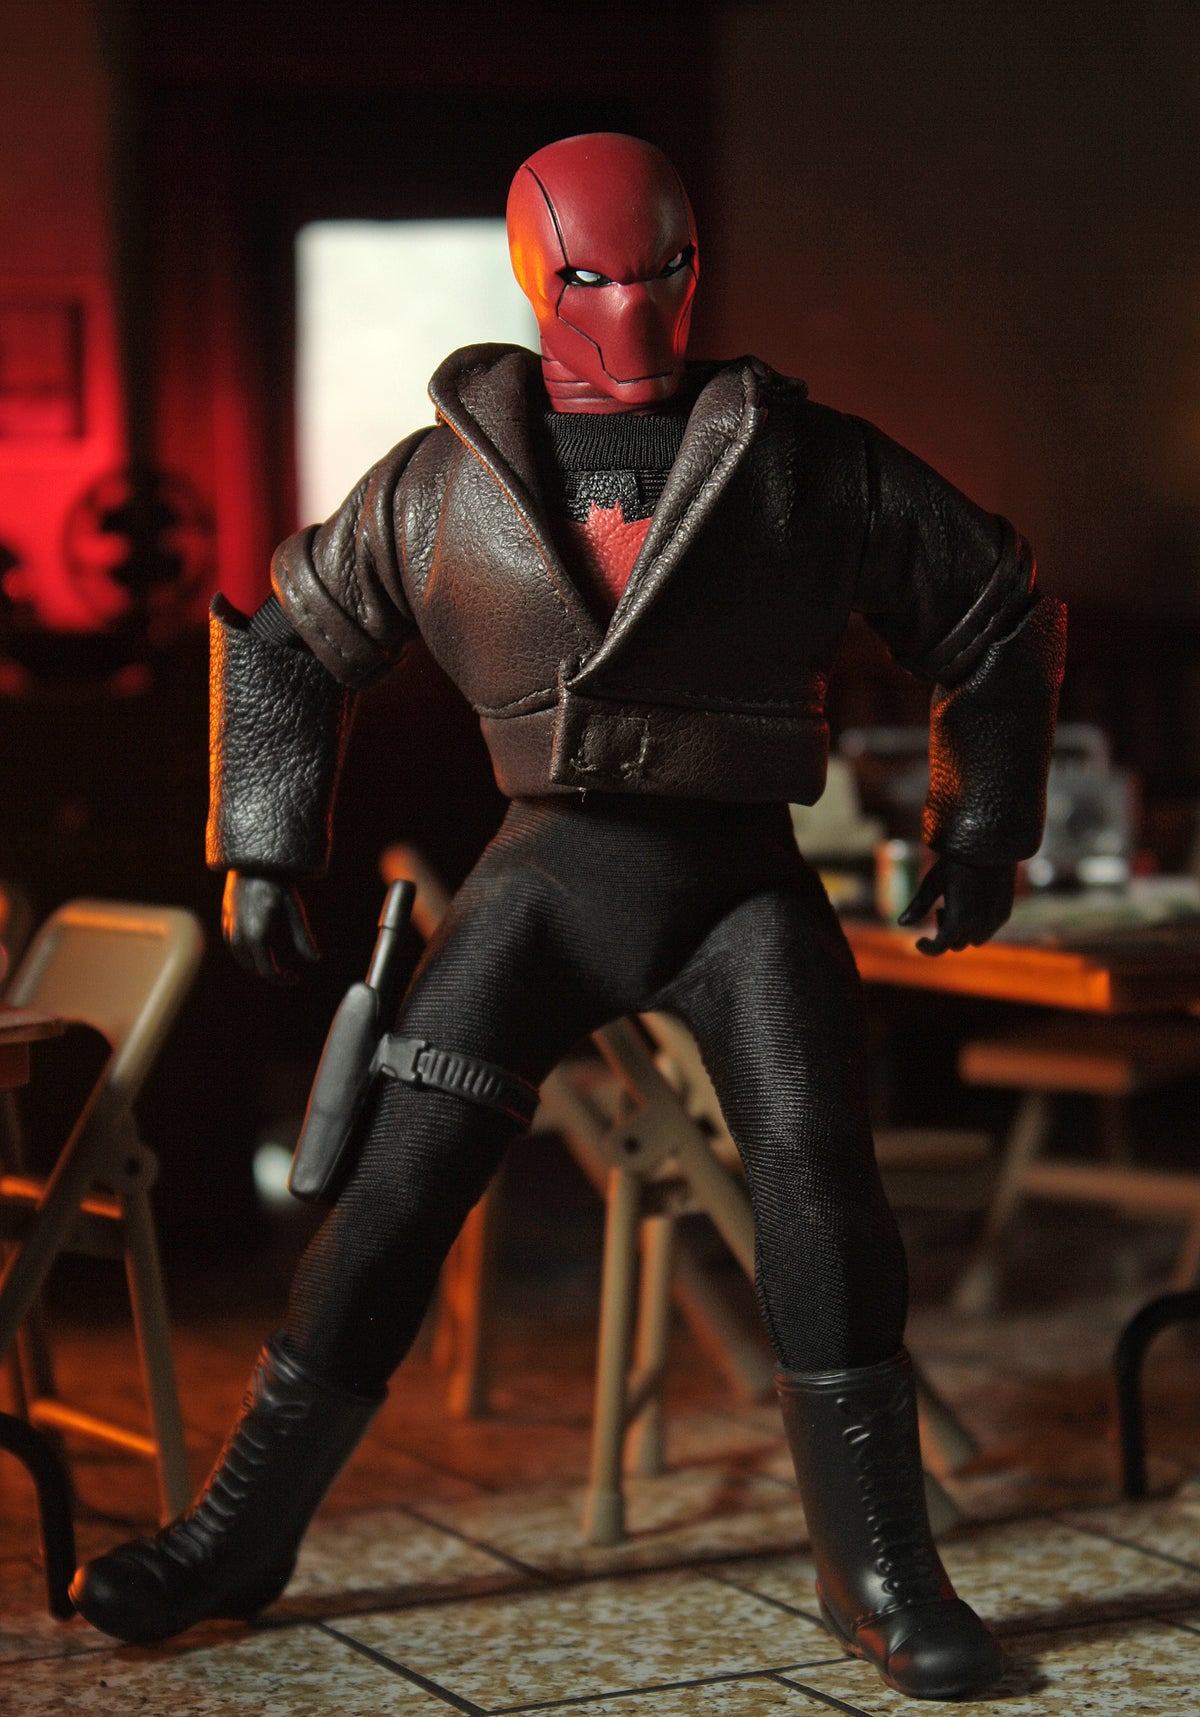 MEGO DC Red Hood 8" Action Figure (PX Previews Exclusive)